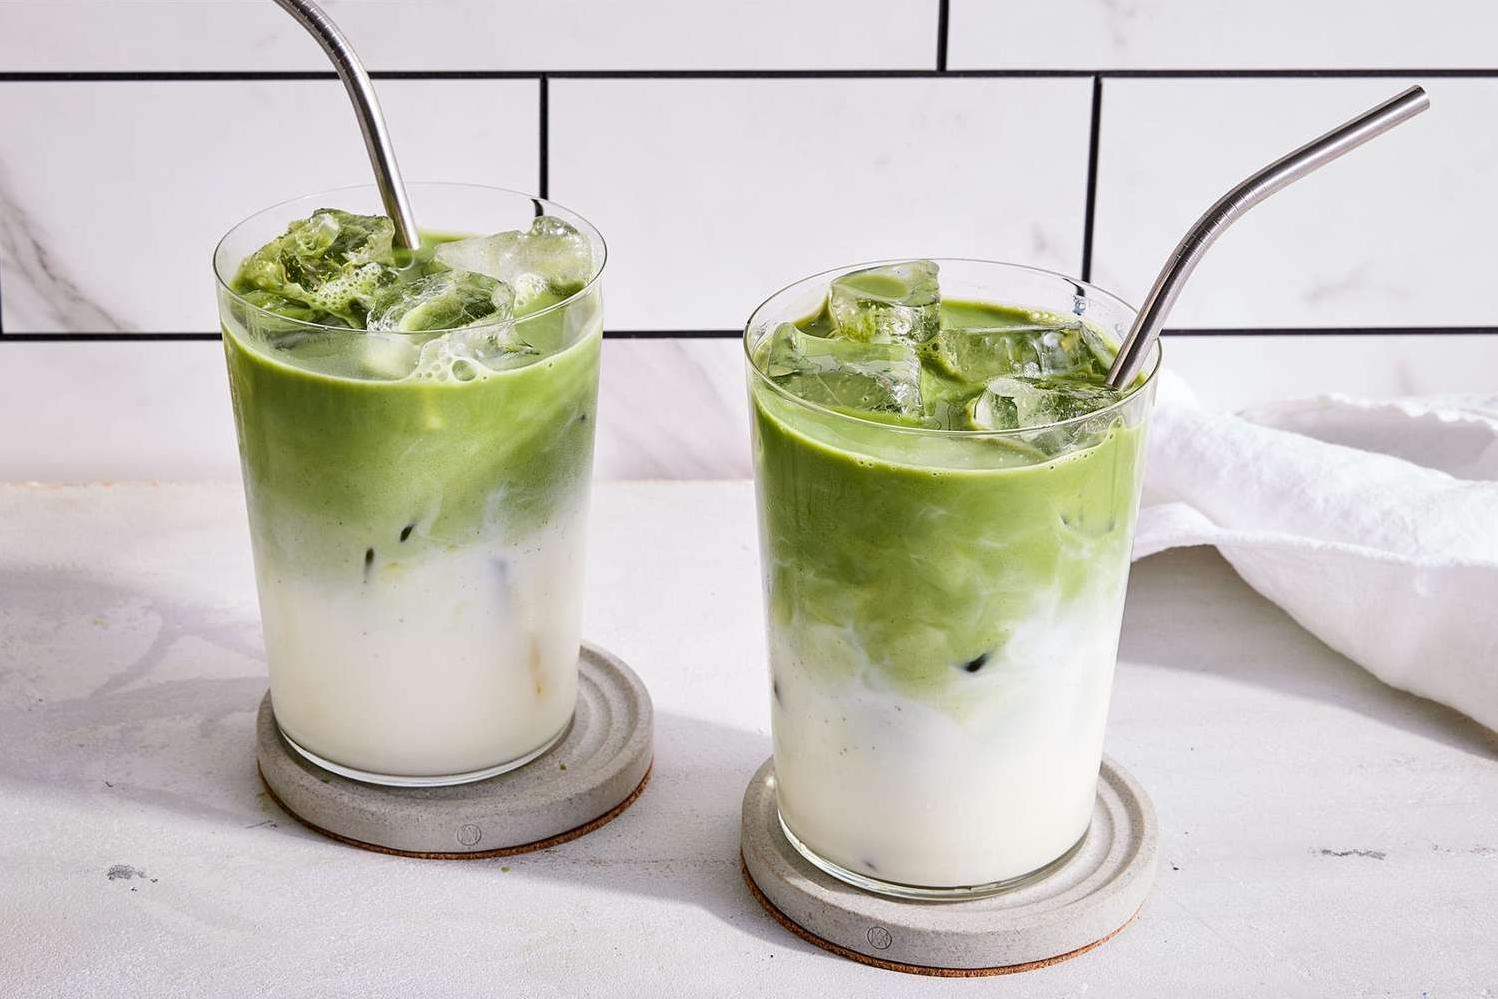  Who needs ice cream when you can have an Iced Matcha Latte?